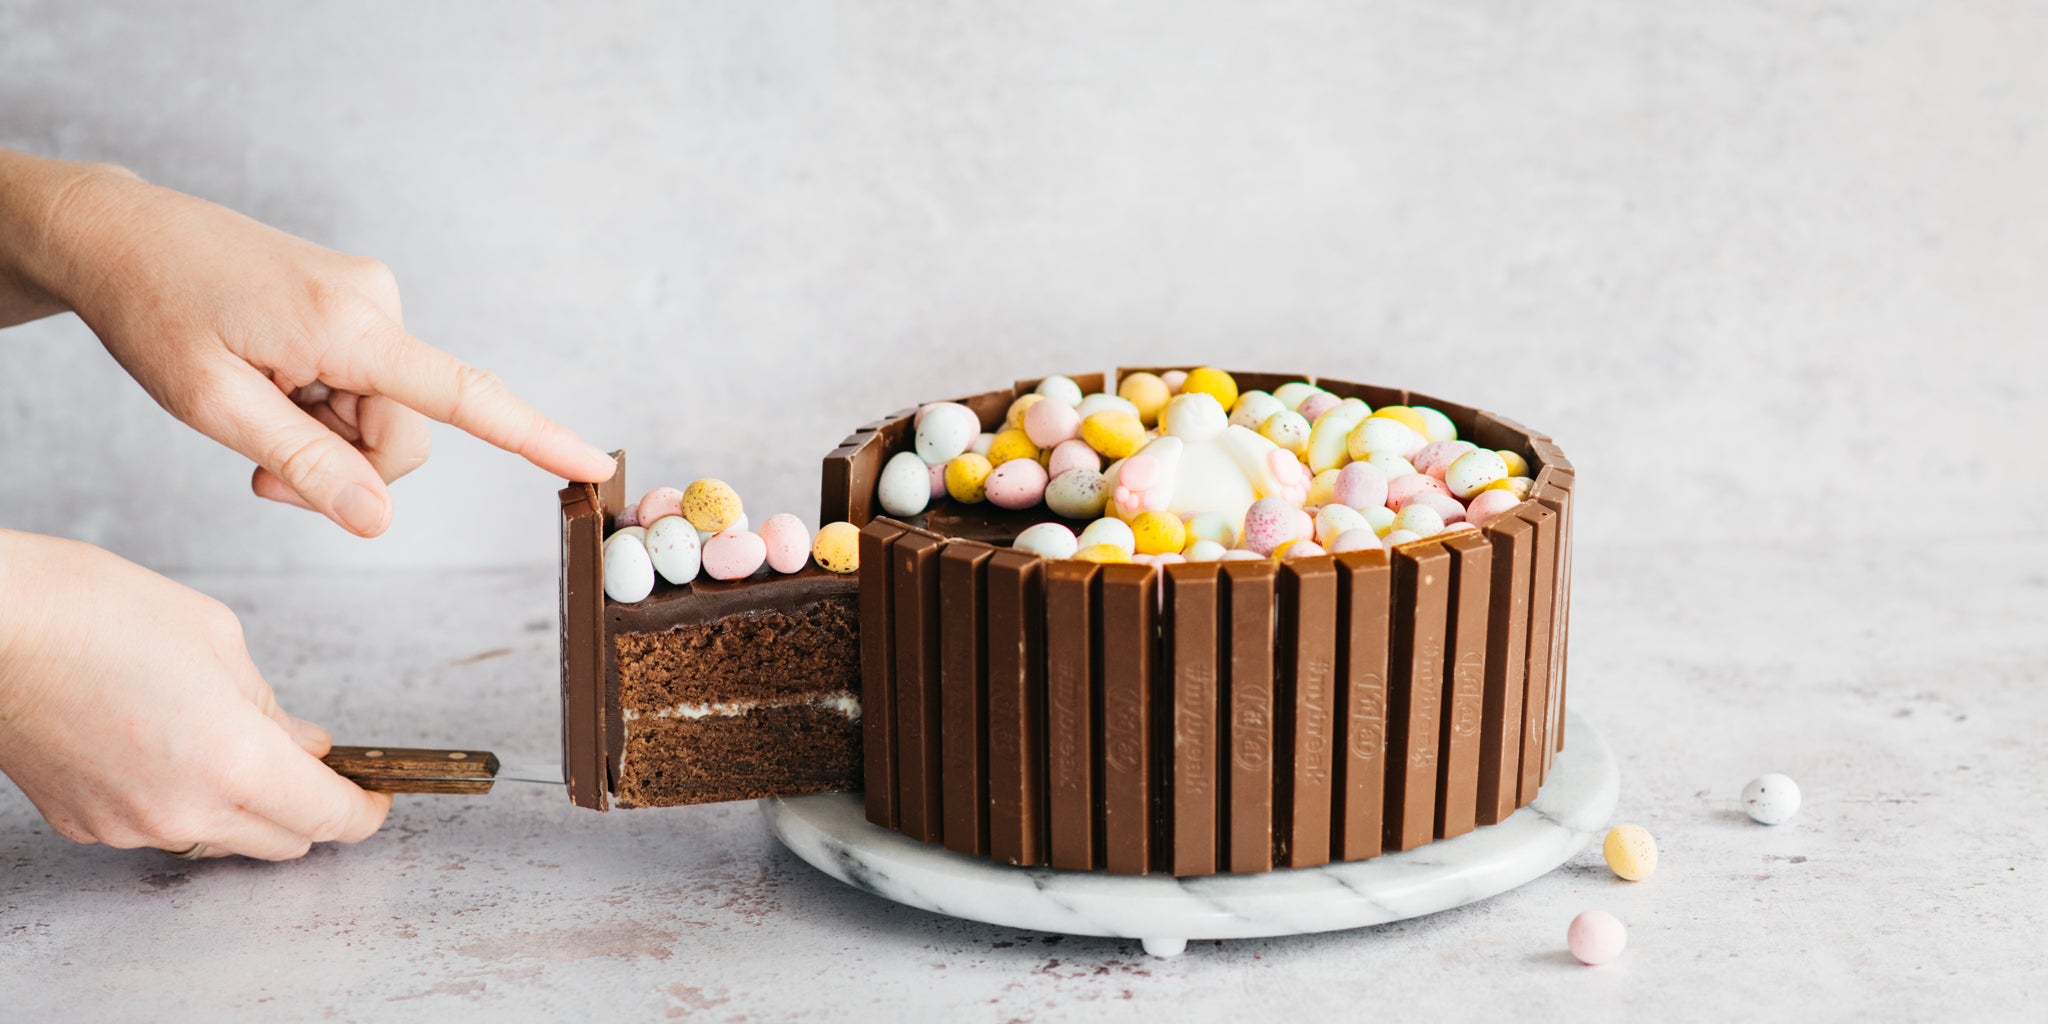 Chocolate easter cake with hand removing a slice from it 